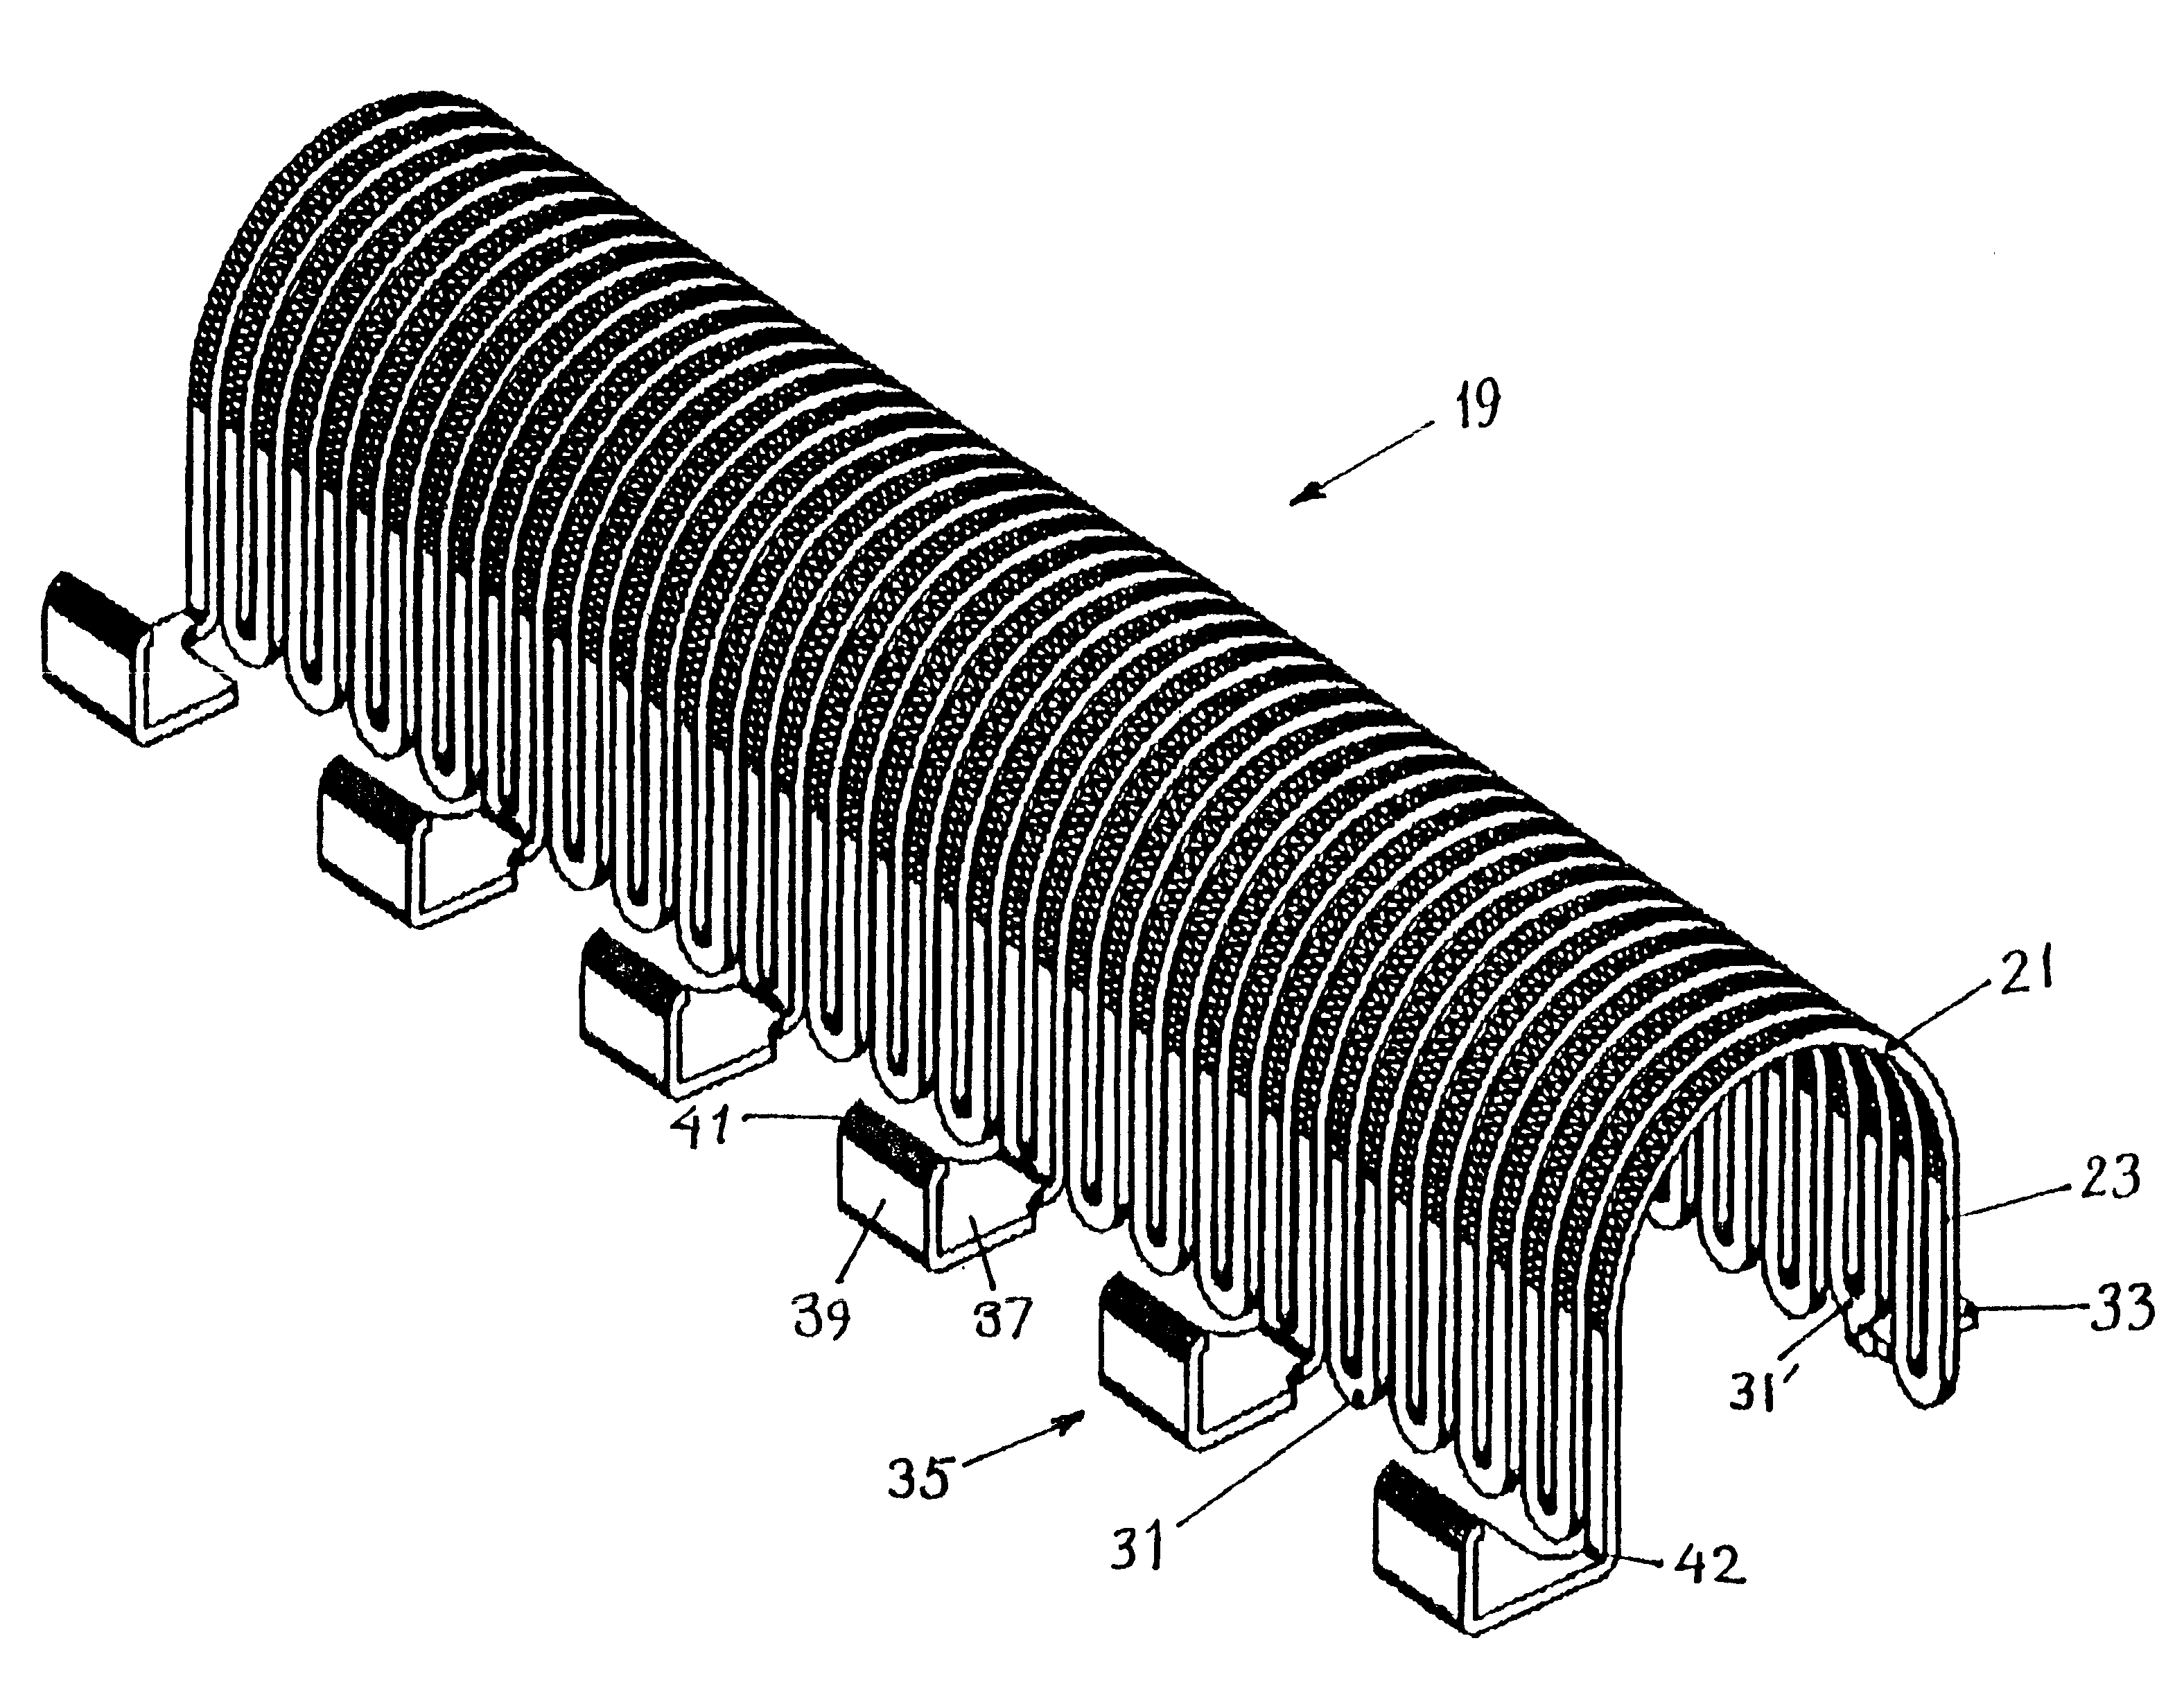 Device for heating shrinkable sleeves